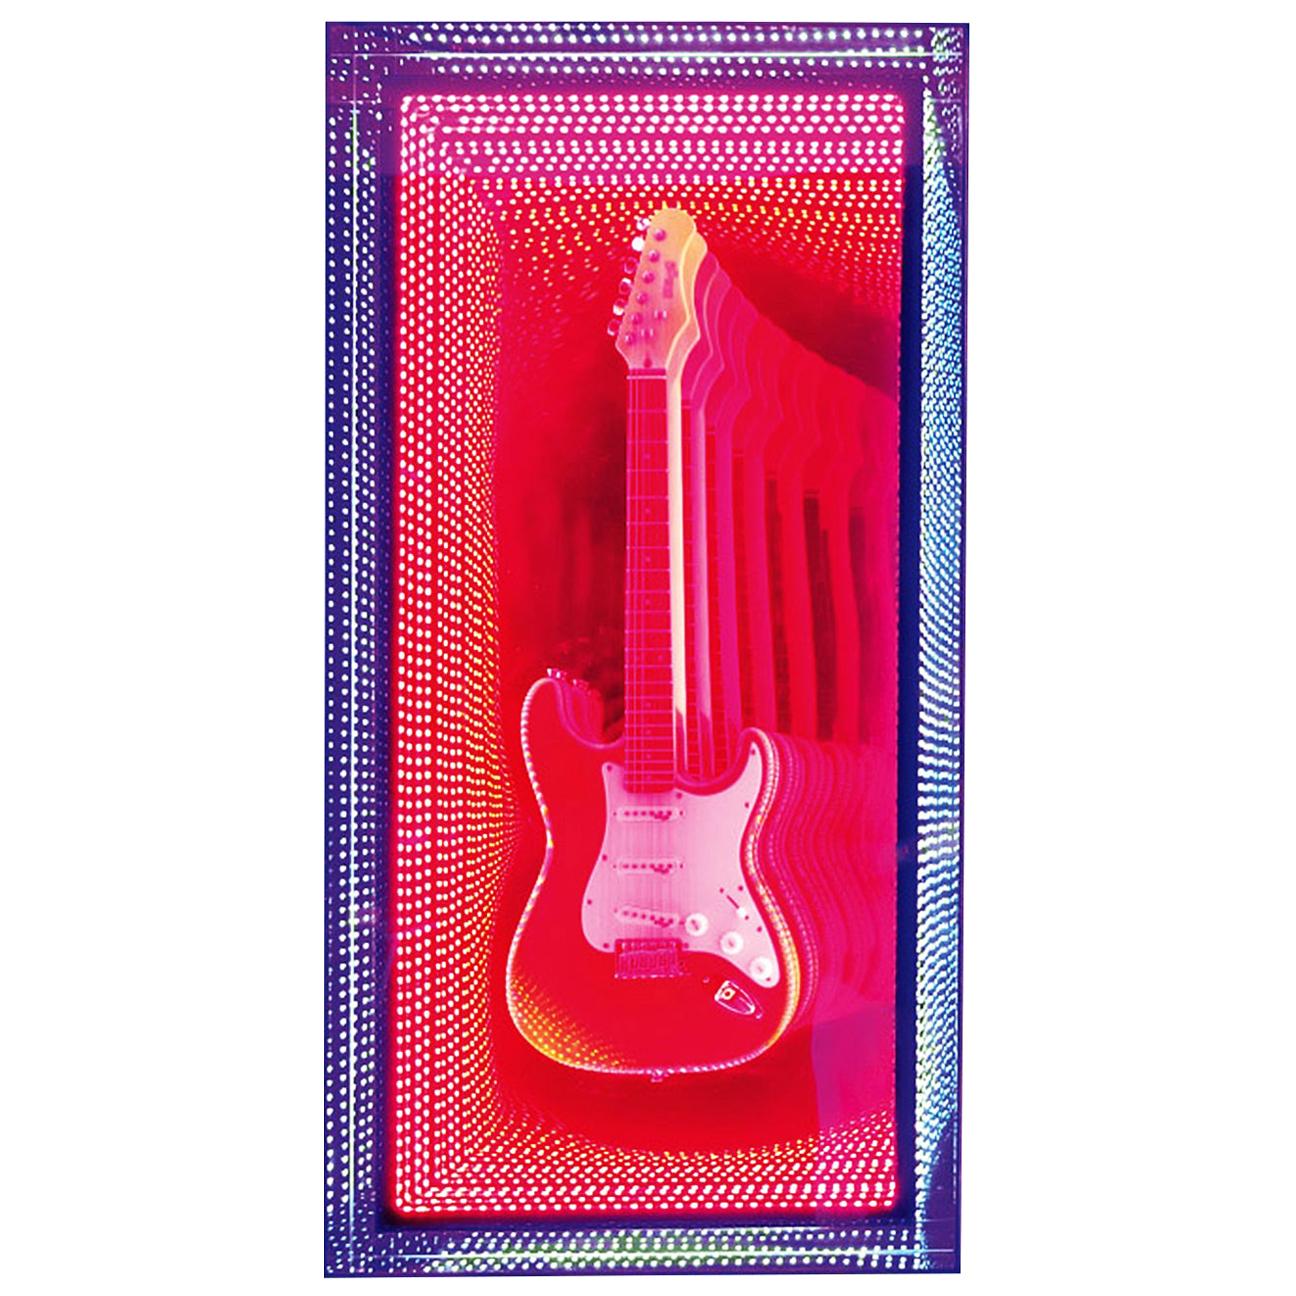 Guitar Infiny Wall Decoration Mirror with Led Lights